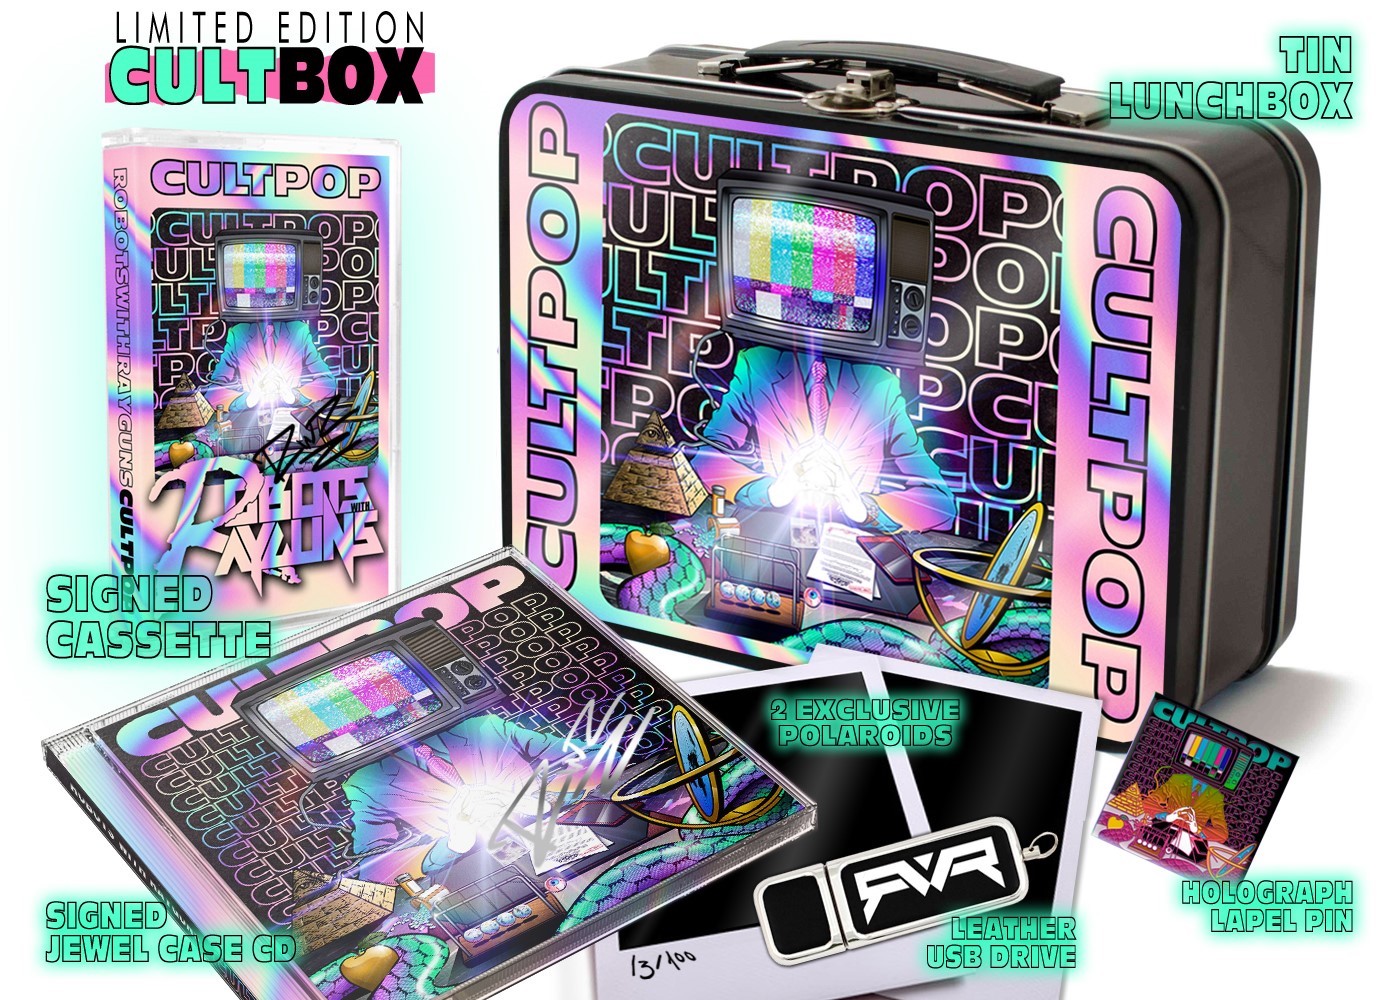 The limited edition box collectors set of Robots With Rayguns new release CULTPOP. Called CULTBOX, it includes a signed cassette, a signed CD, a leather USB drive, two one-of-a-kind artist produced Polaroids, and a holograph lapel pin, all in a retro tin lunch box. Available only at cultpop.net. 